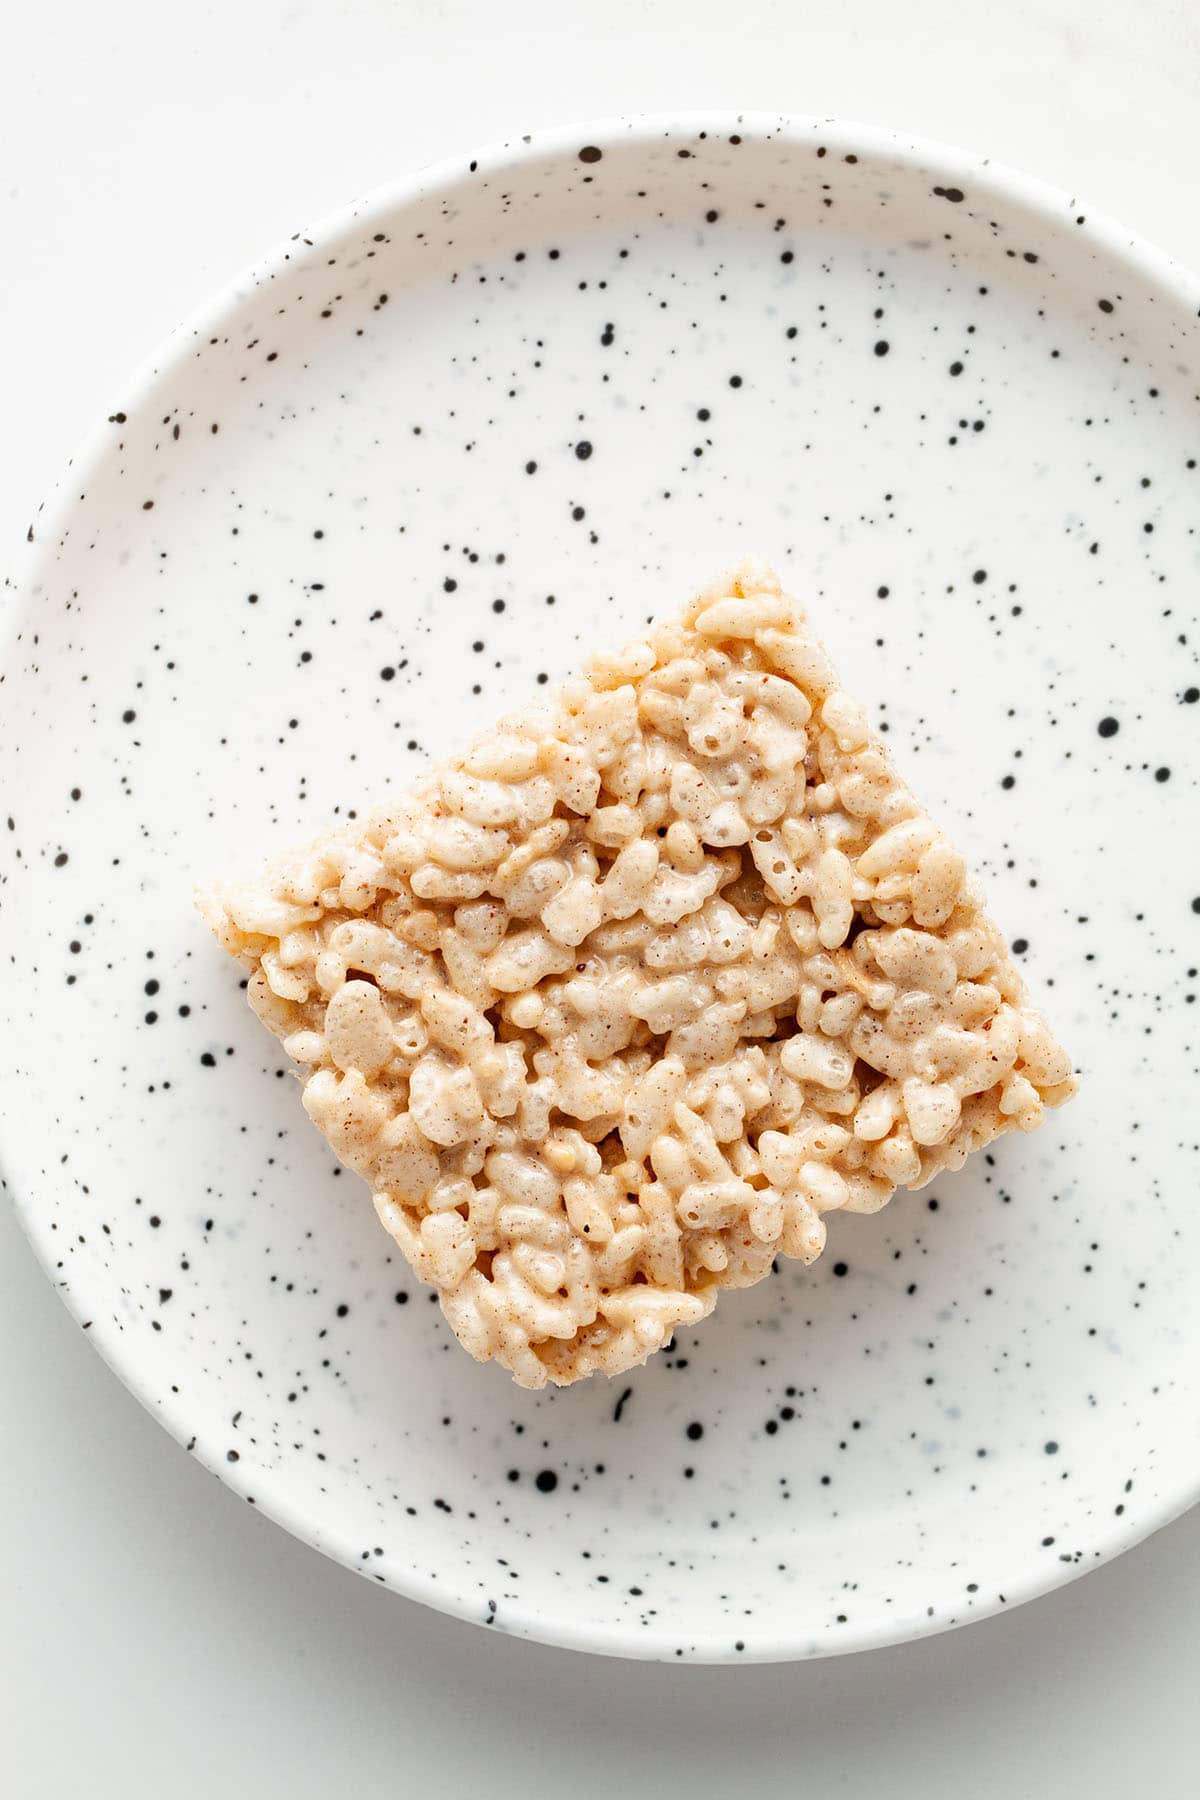 One spiced Rice Krispie treat on a small white speckled plate.